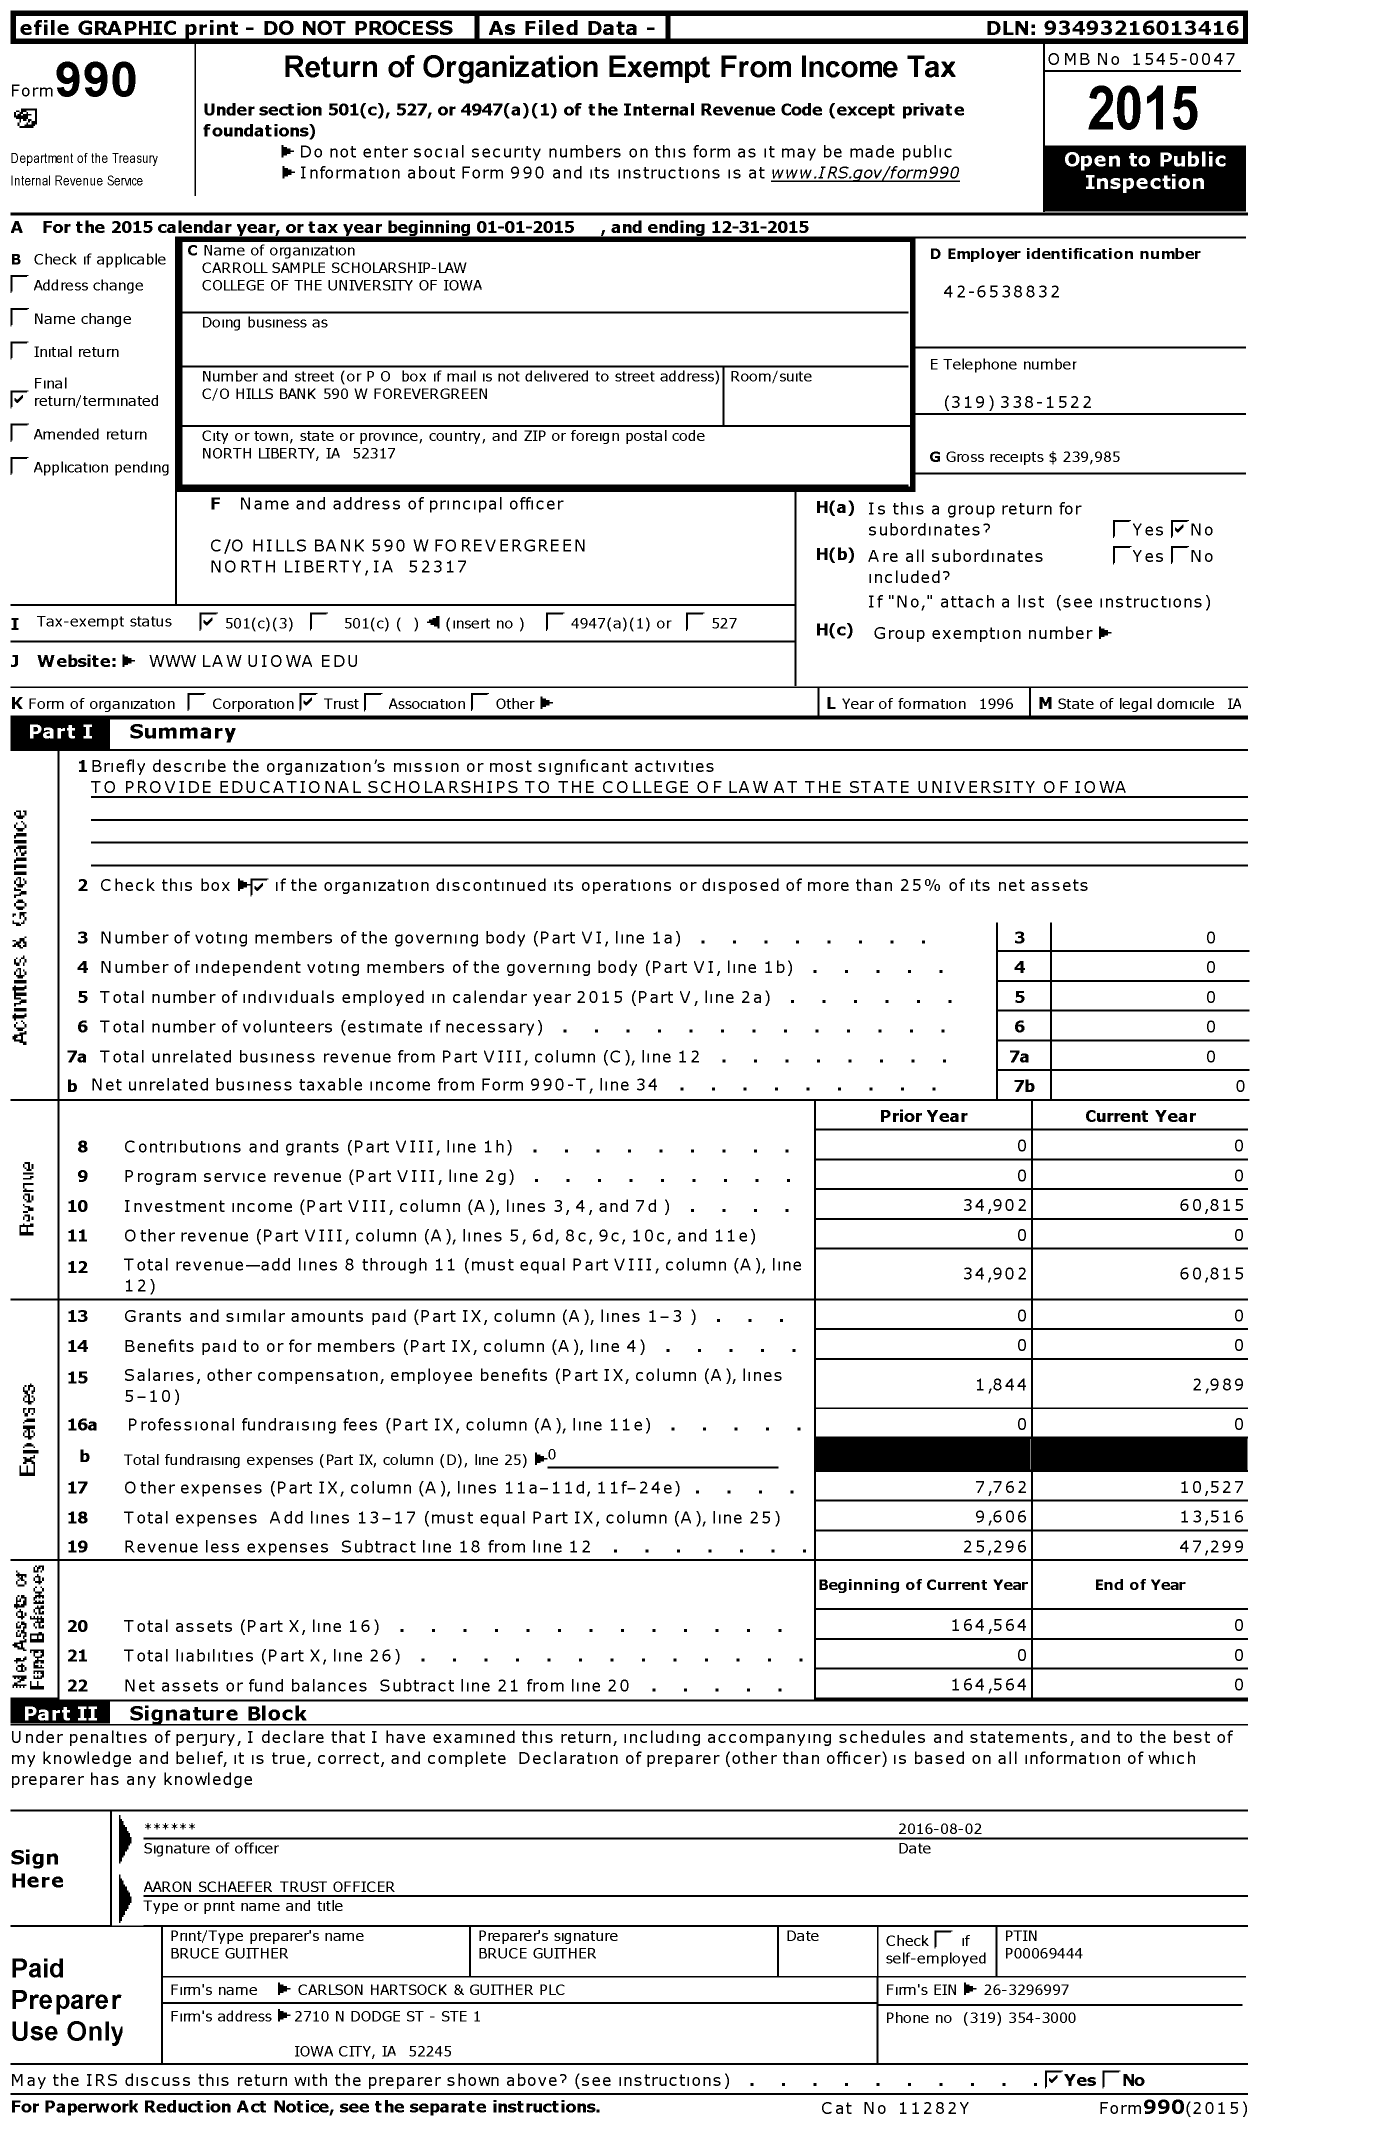 Image of first page of 2015 Form 990 for Carroll Sample Scholarship-Law College of the University of Iowa